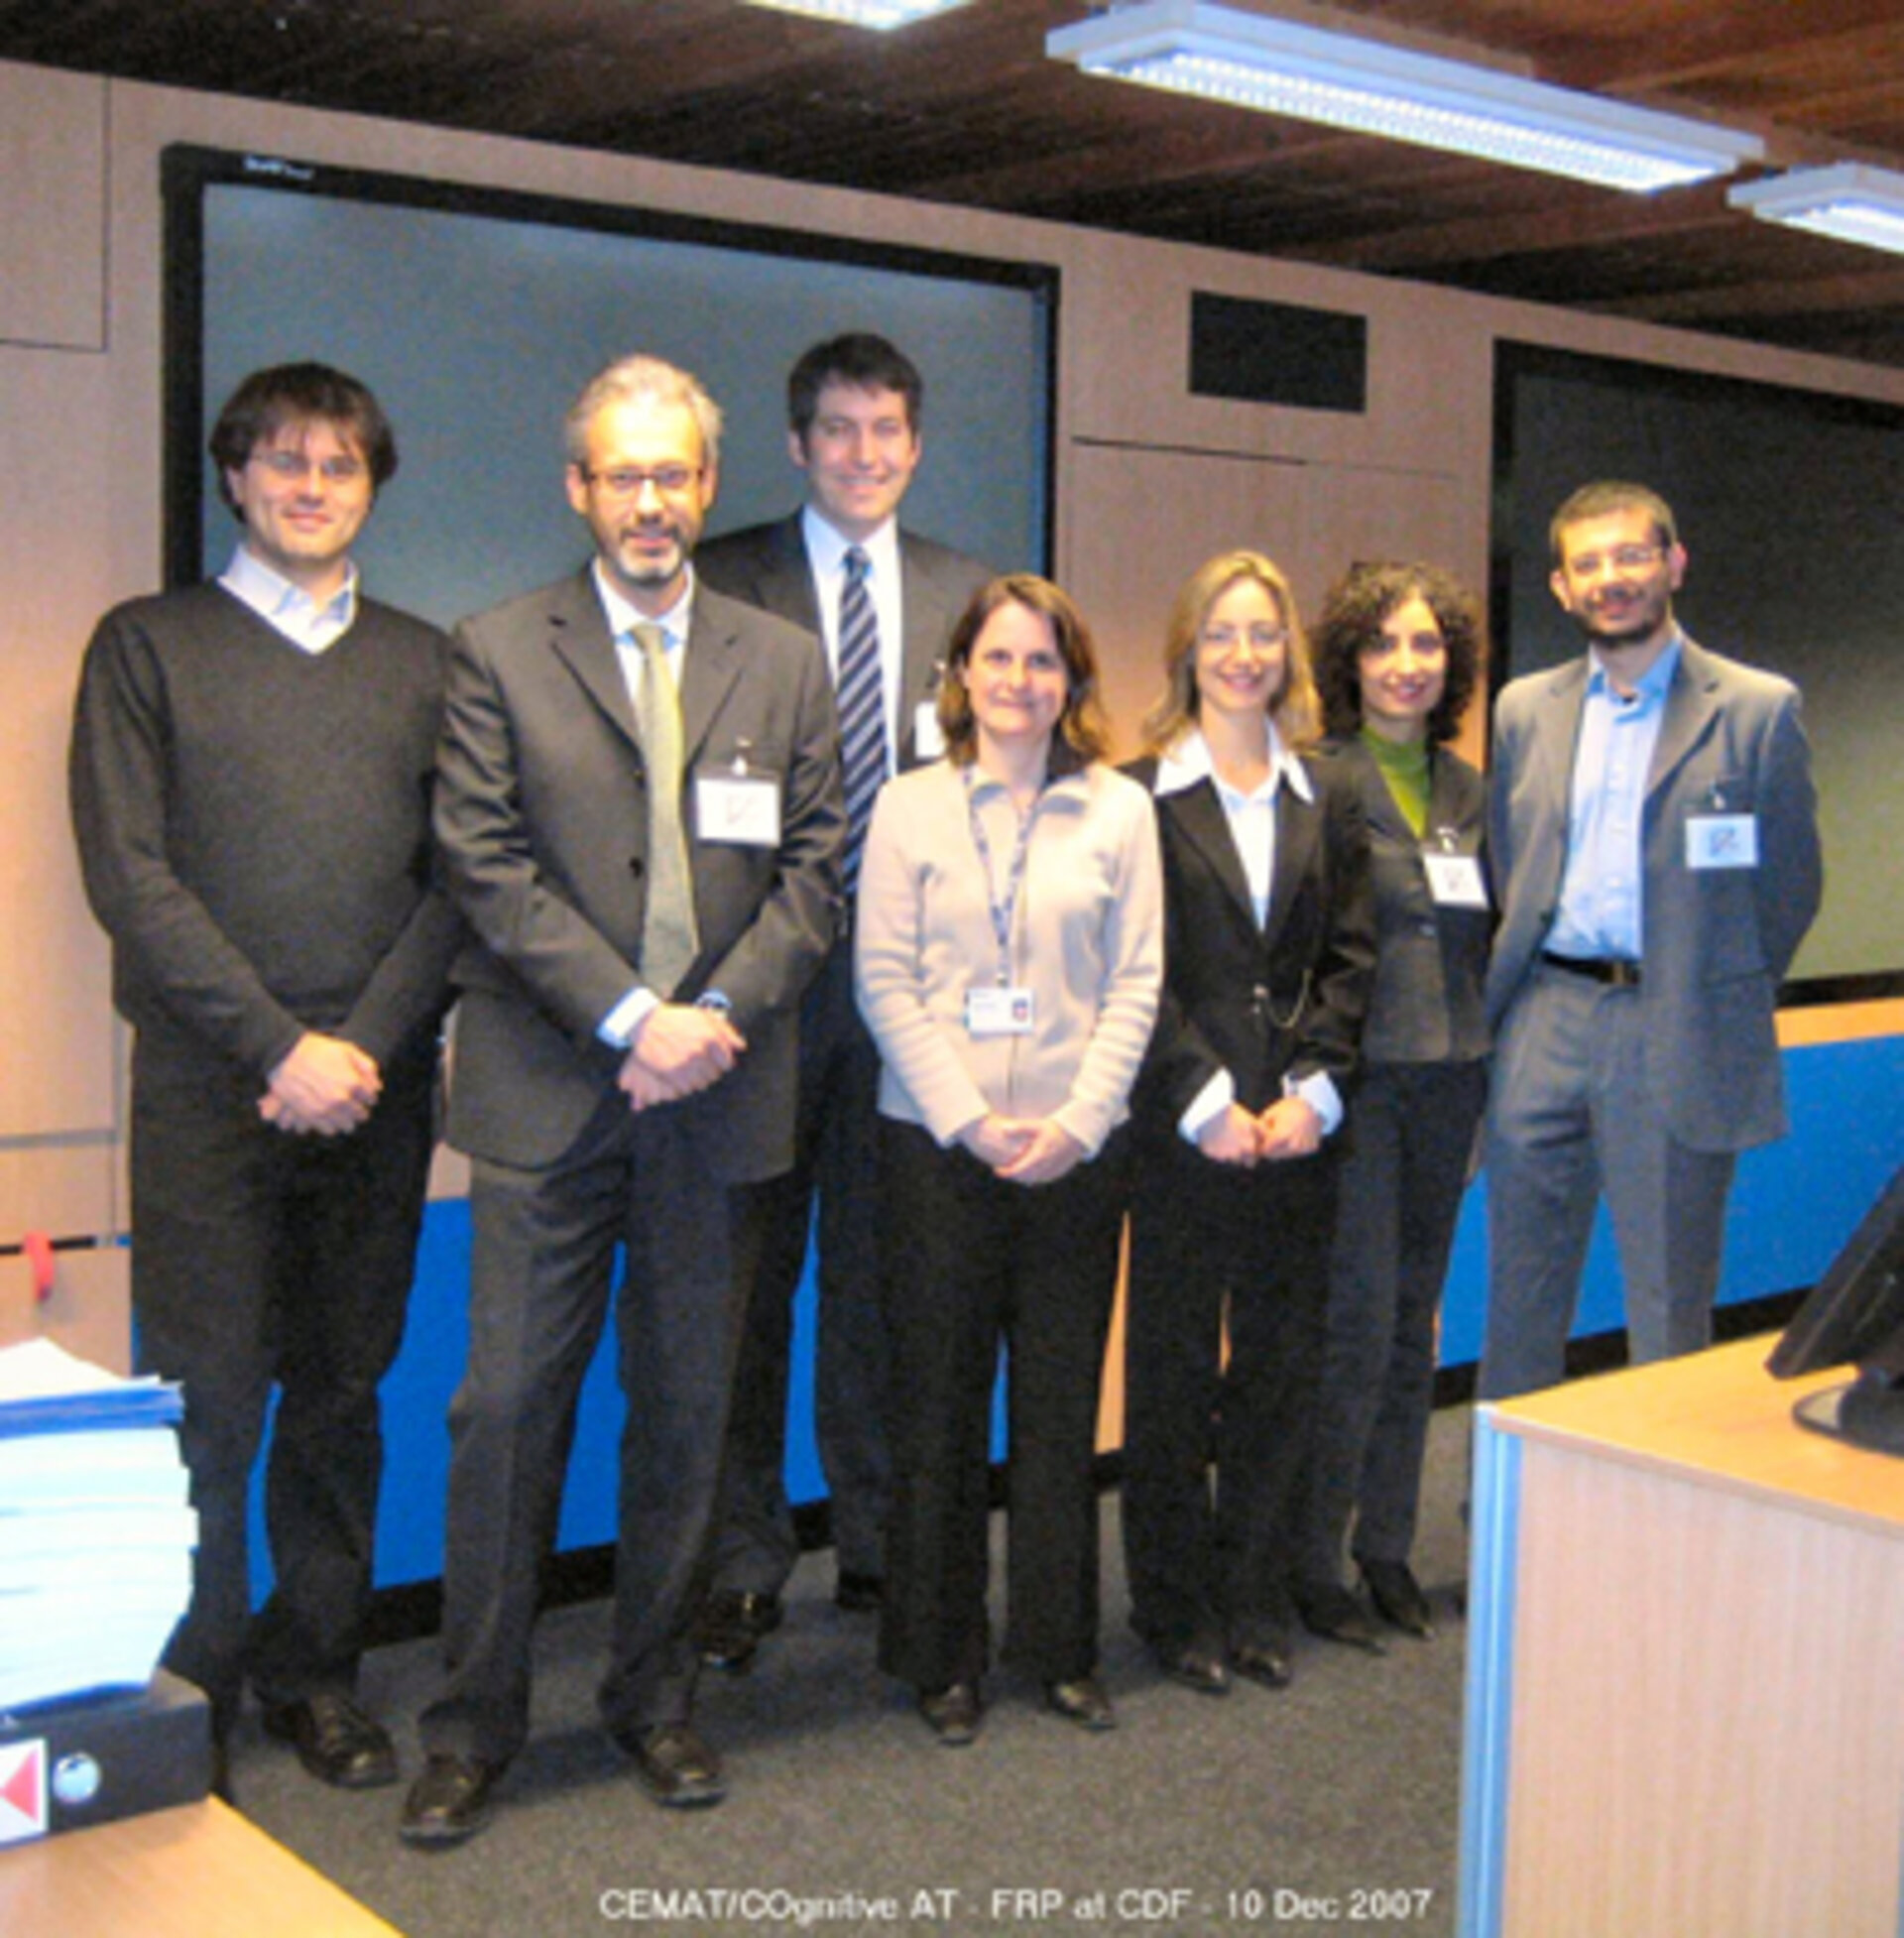 Study team during the final presentation of CEMAT in CDF